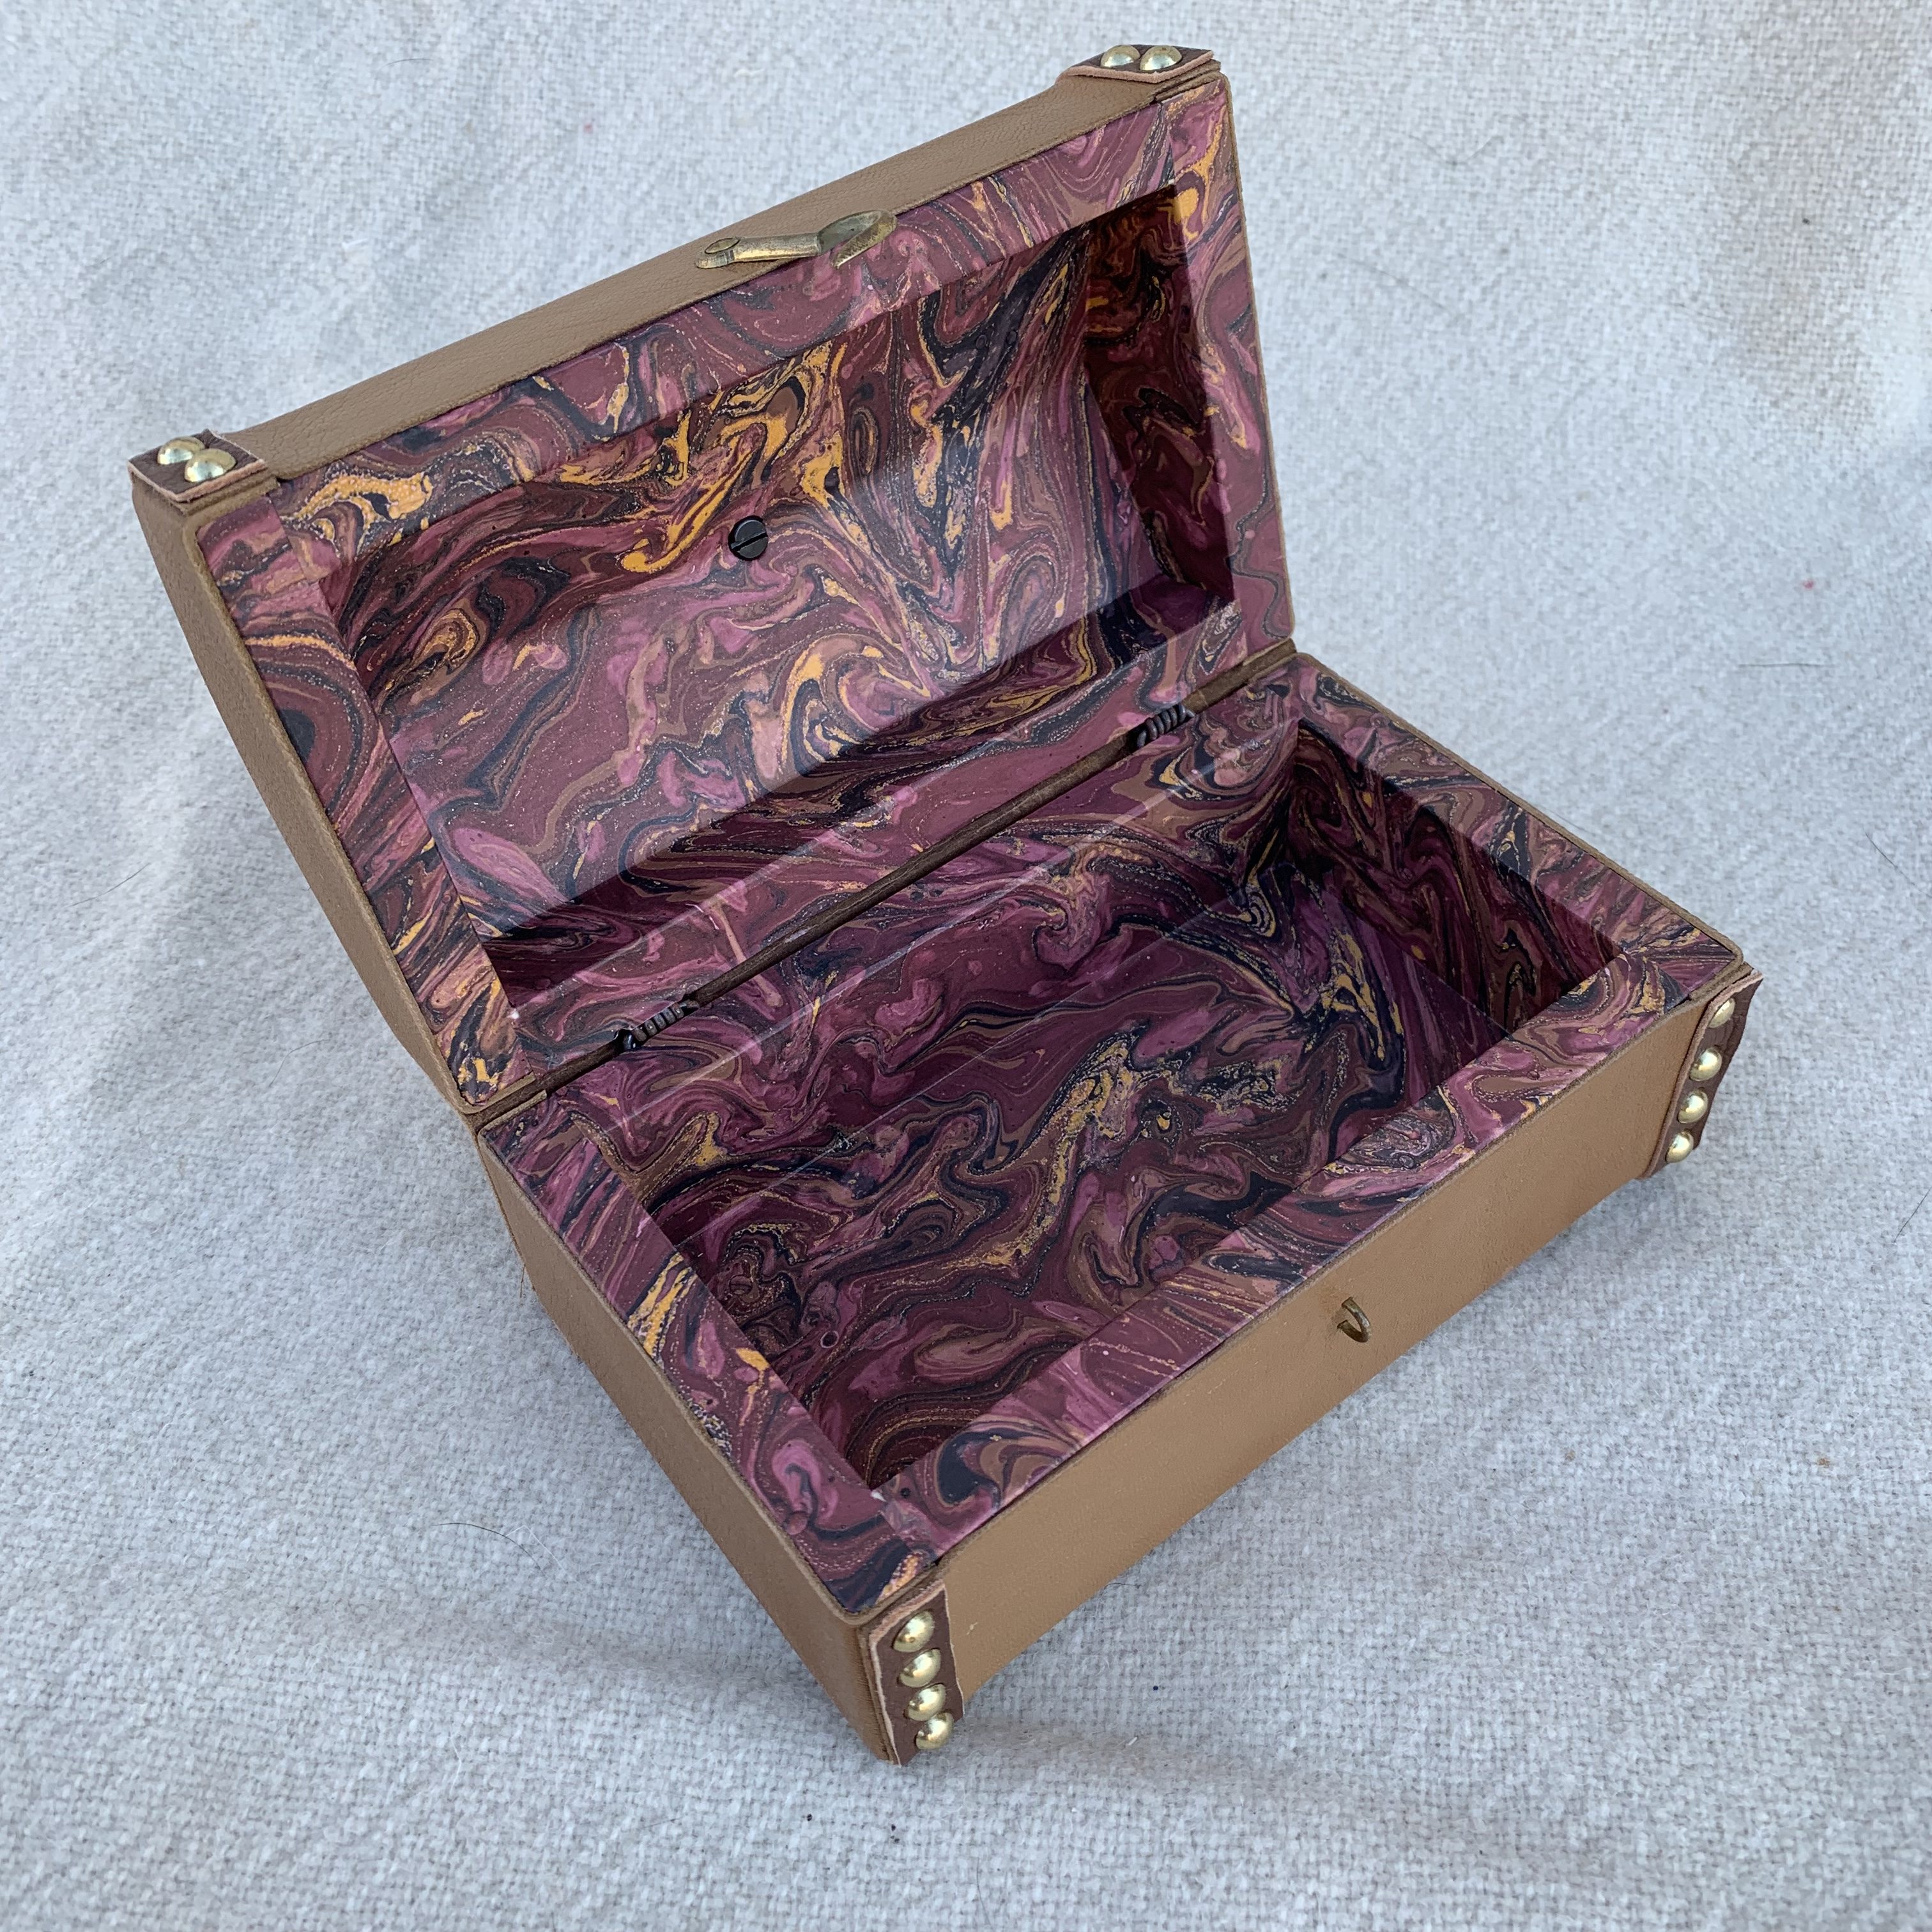 Hand crafted reproduction boxes